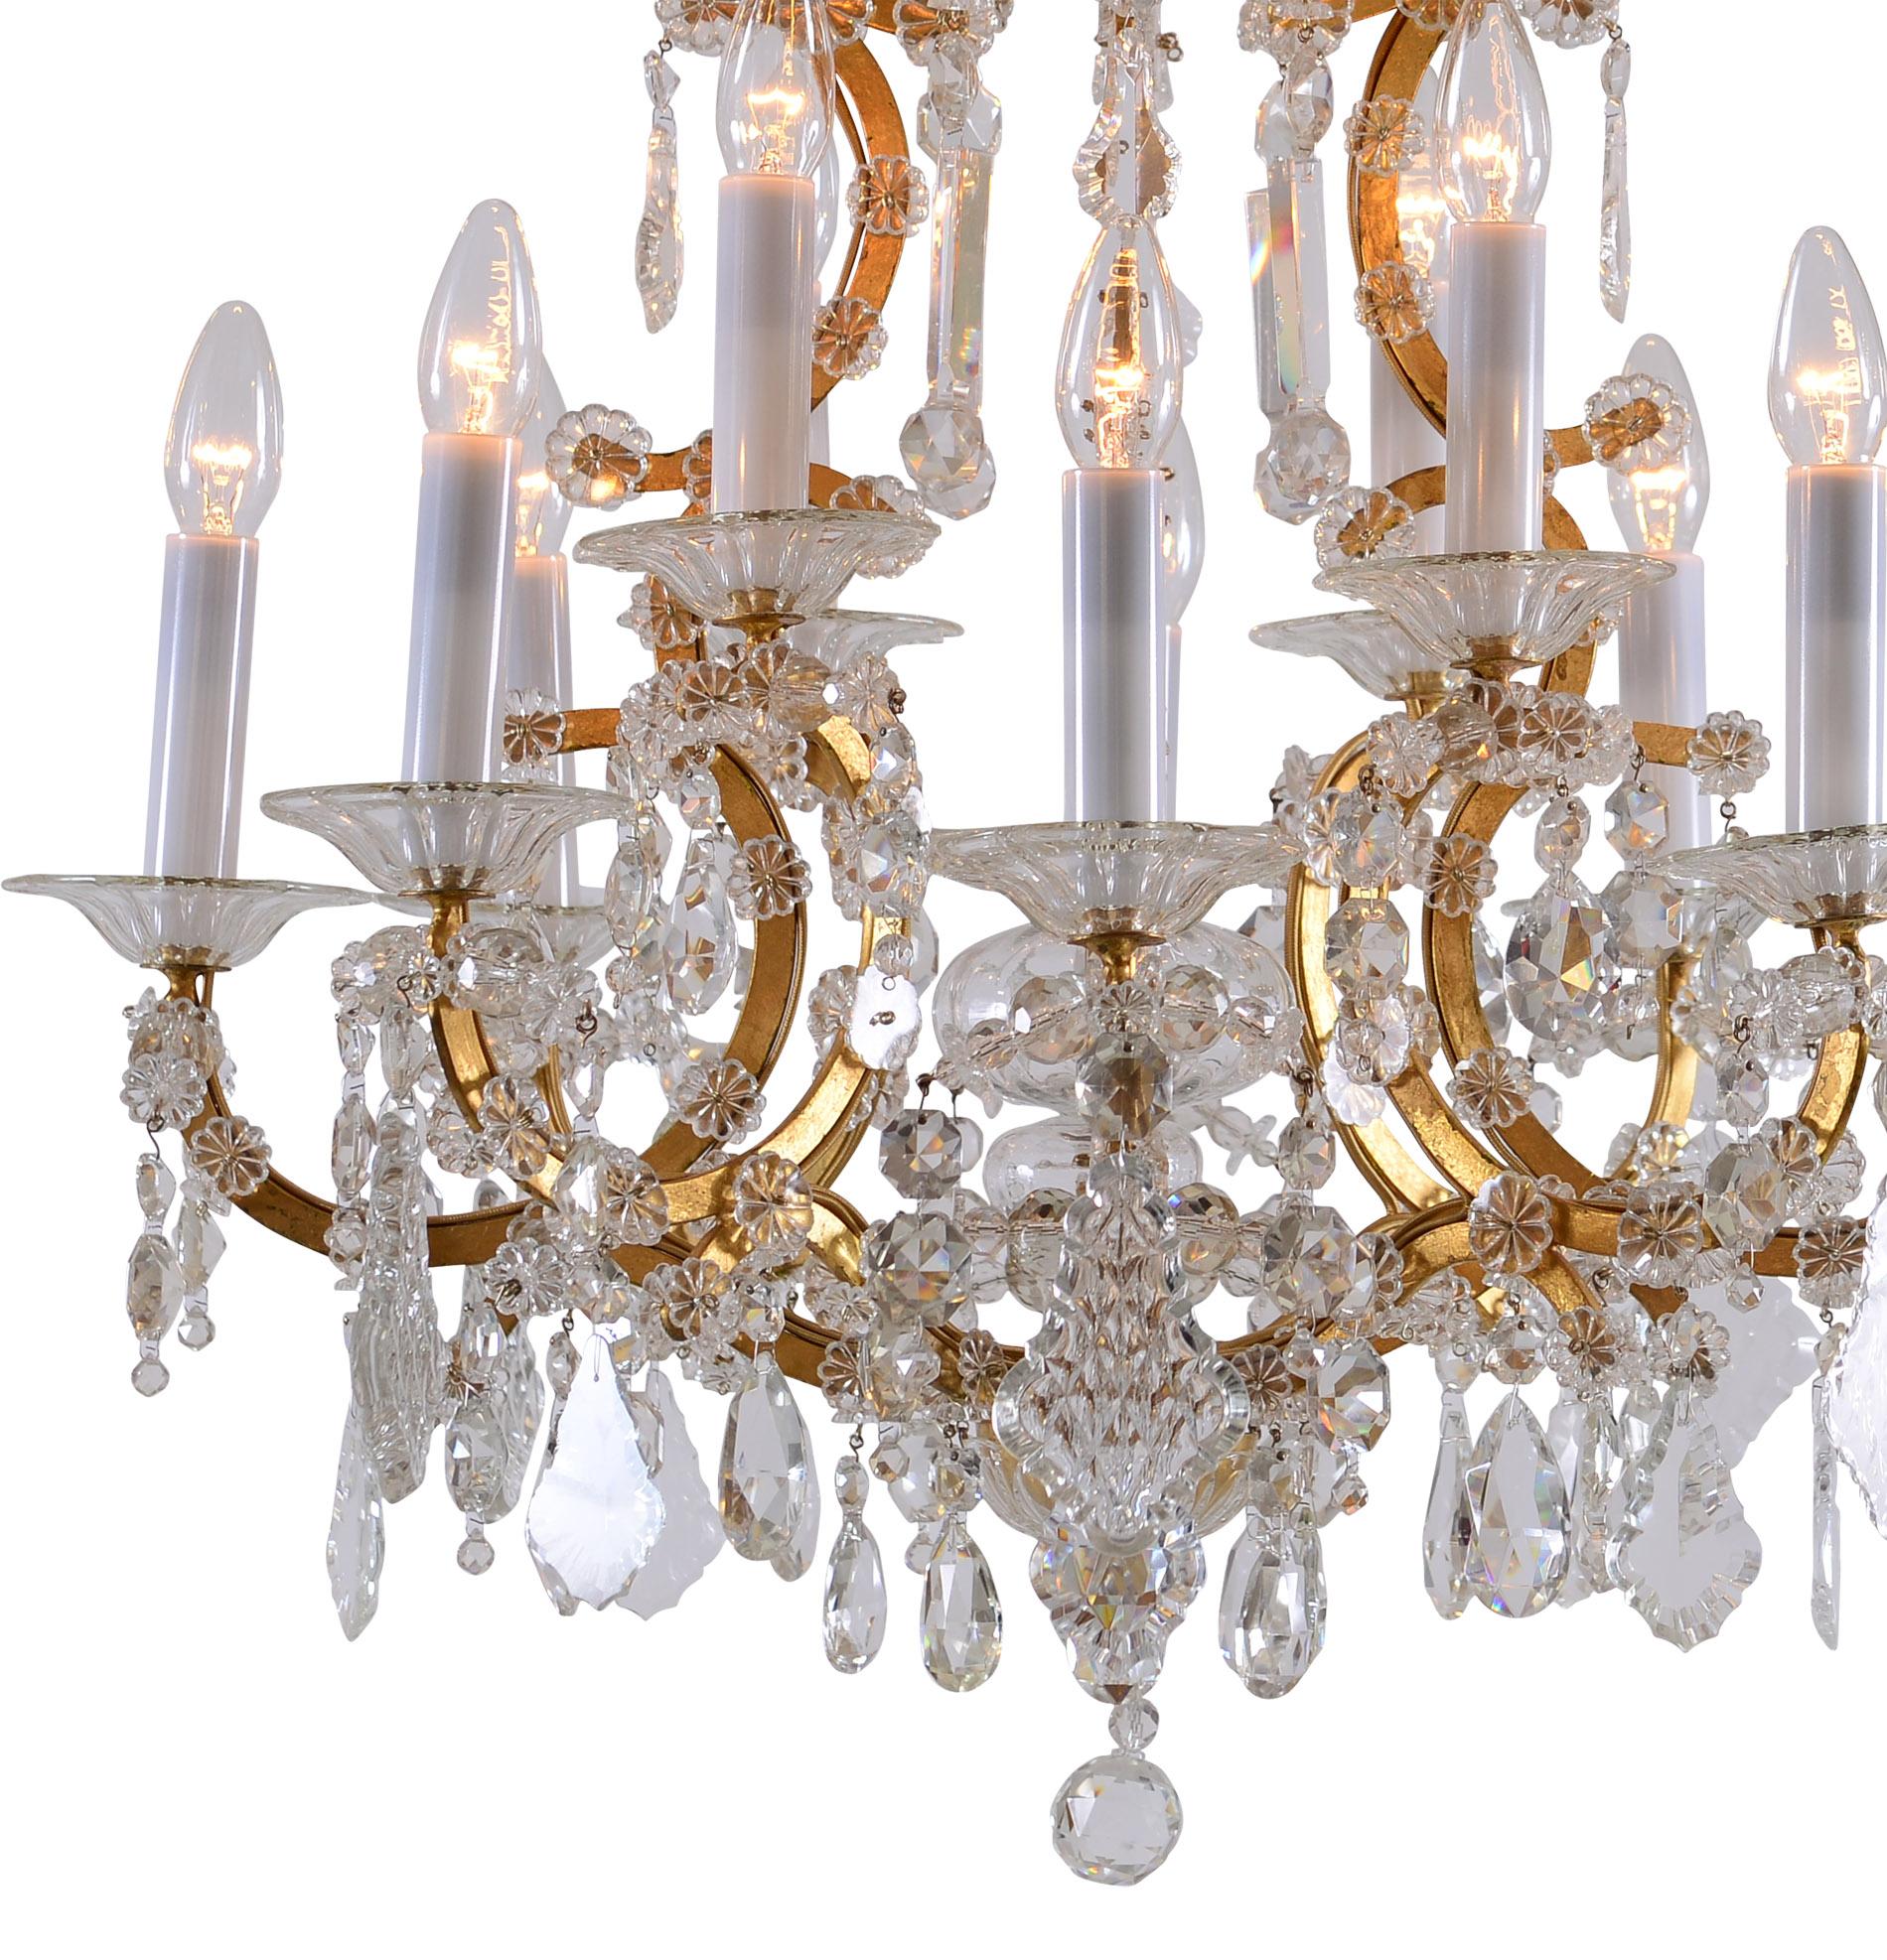 Hand-Crafted Original Maria Theresien Style Crystal Chandelier with Rich Prism Hanging For Sale